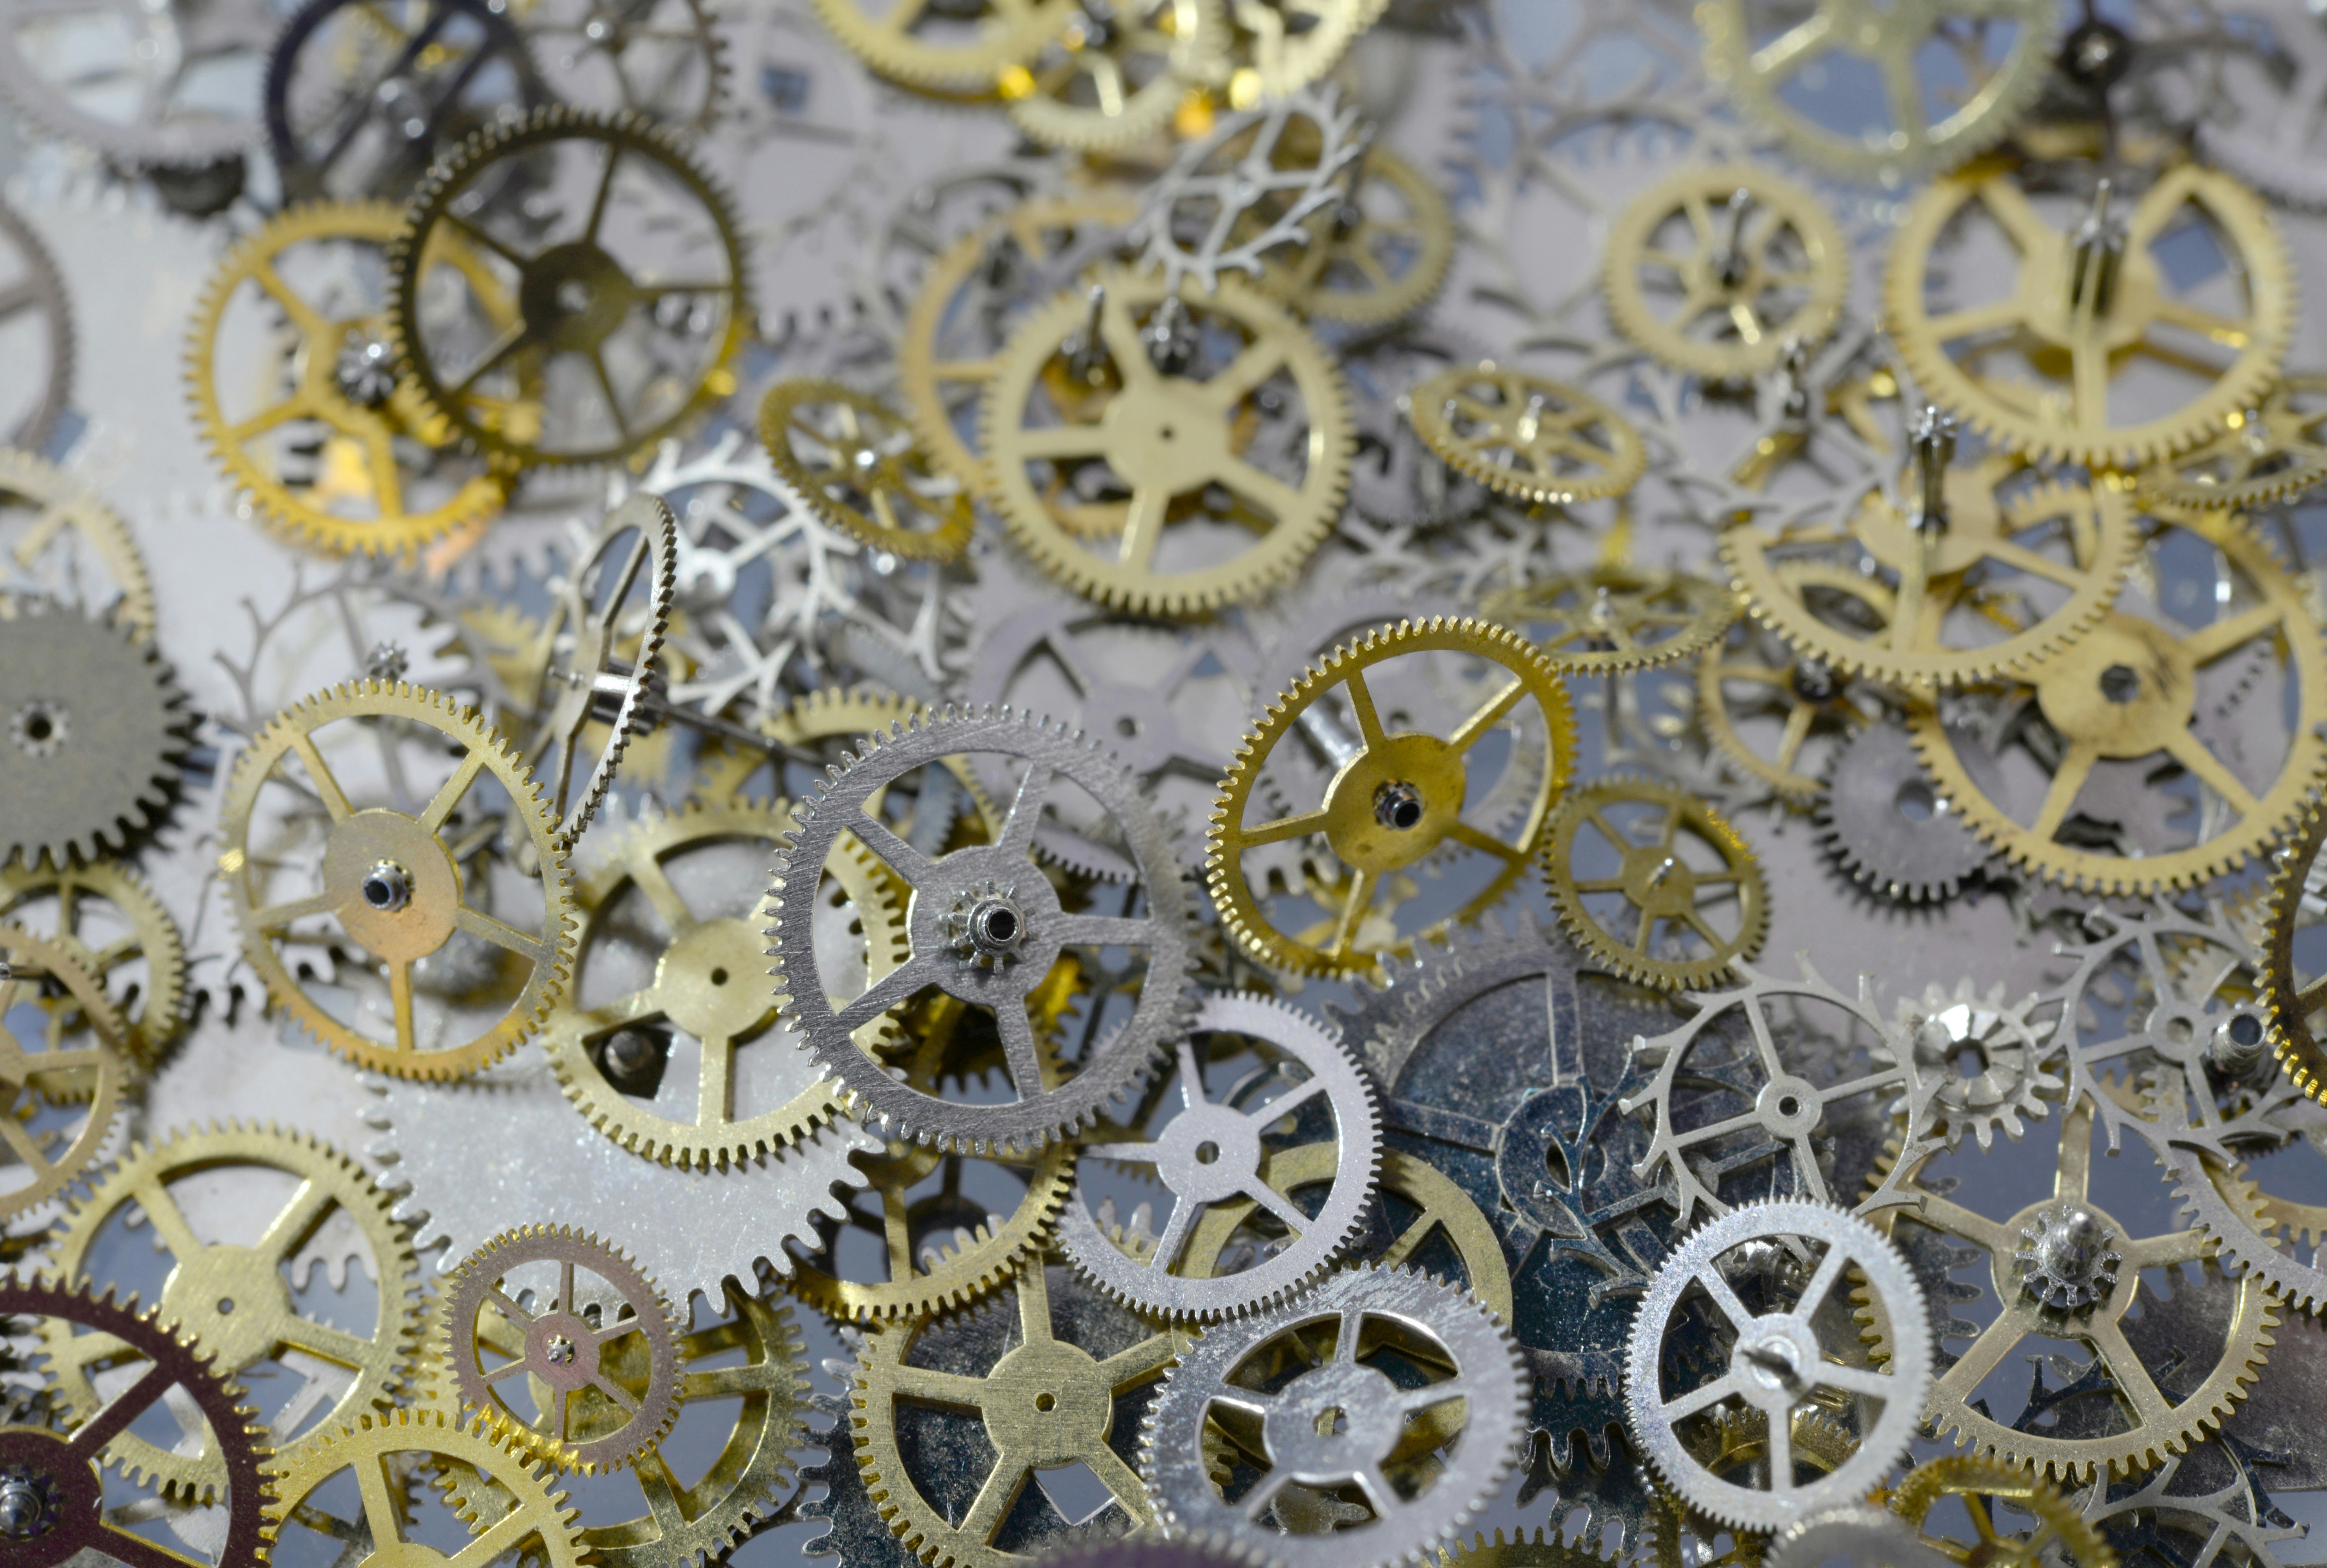 Macro of metal gears, cogs and wheels from old watches.